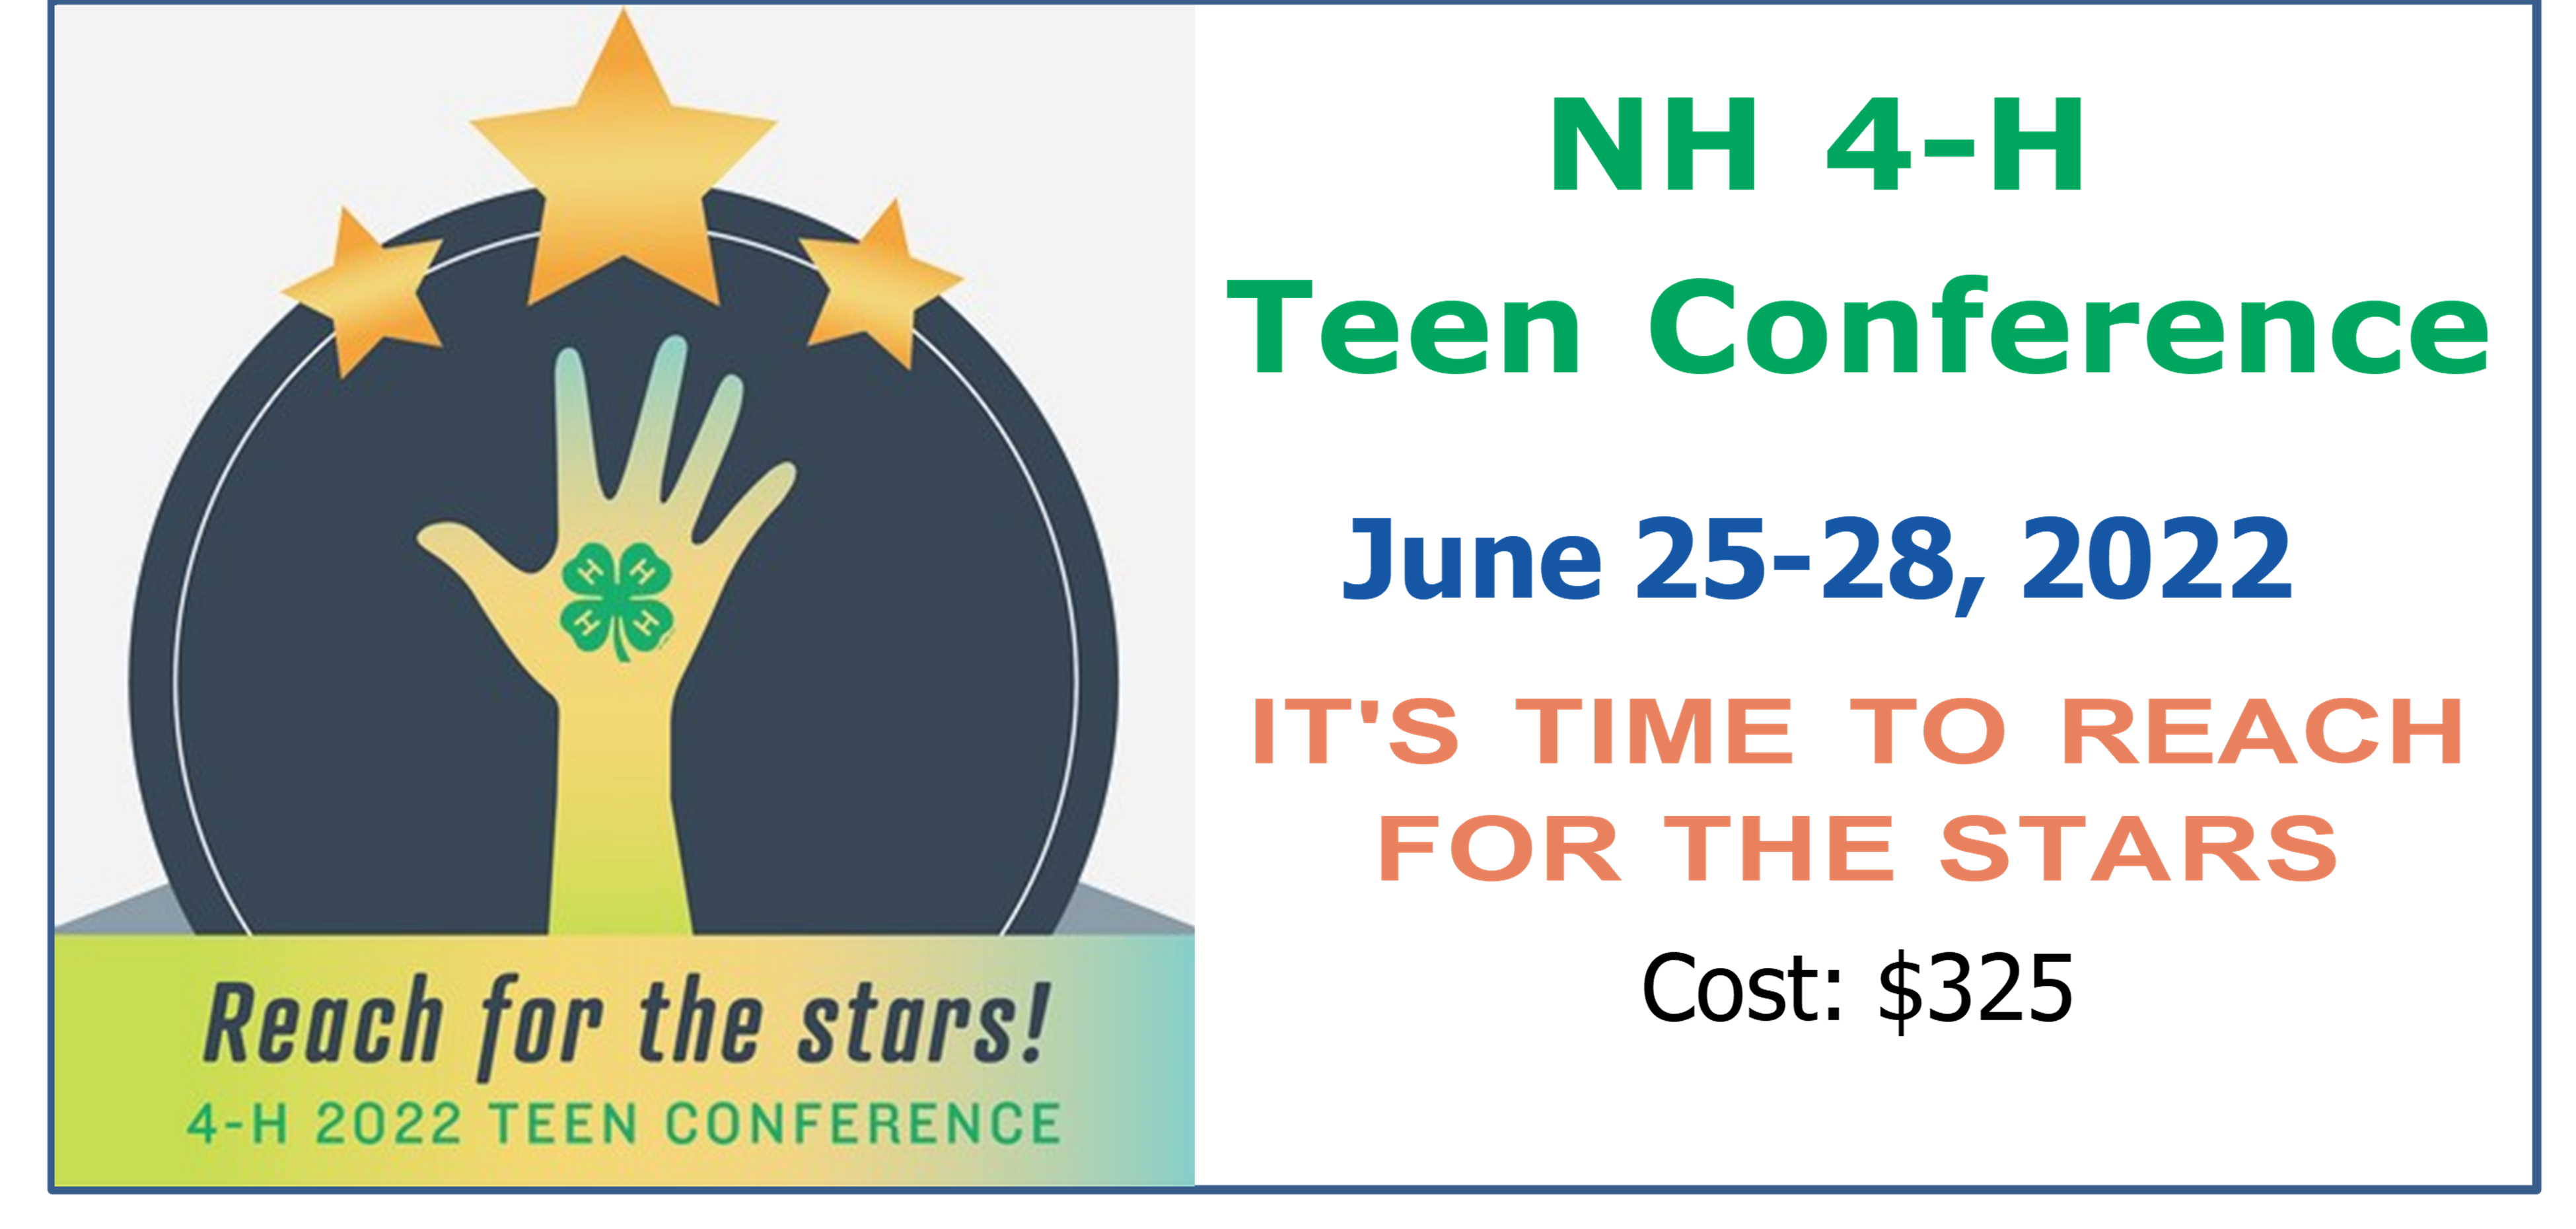 NH 4-H Teen Conference